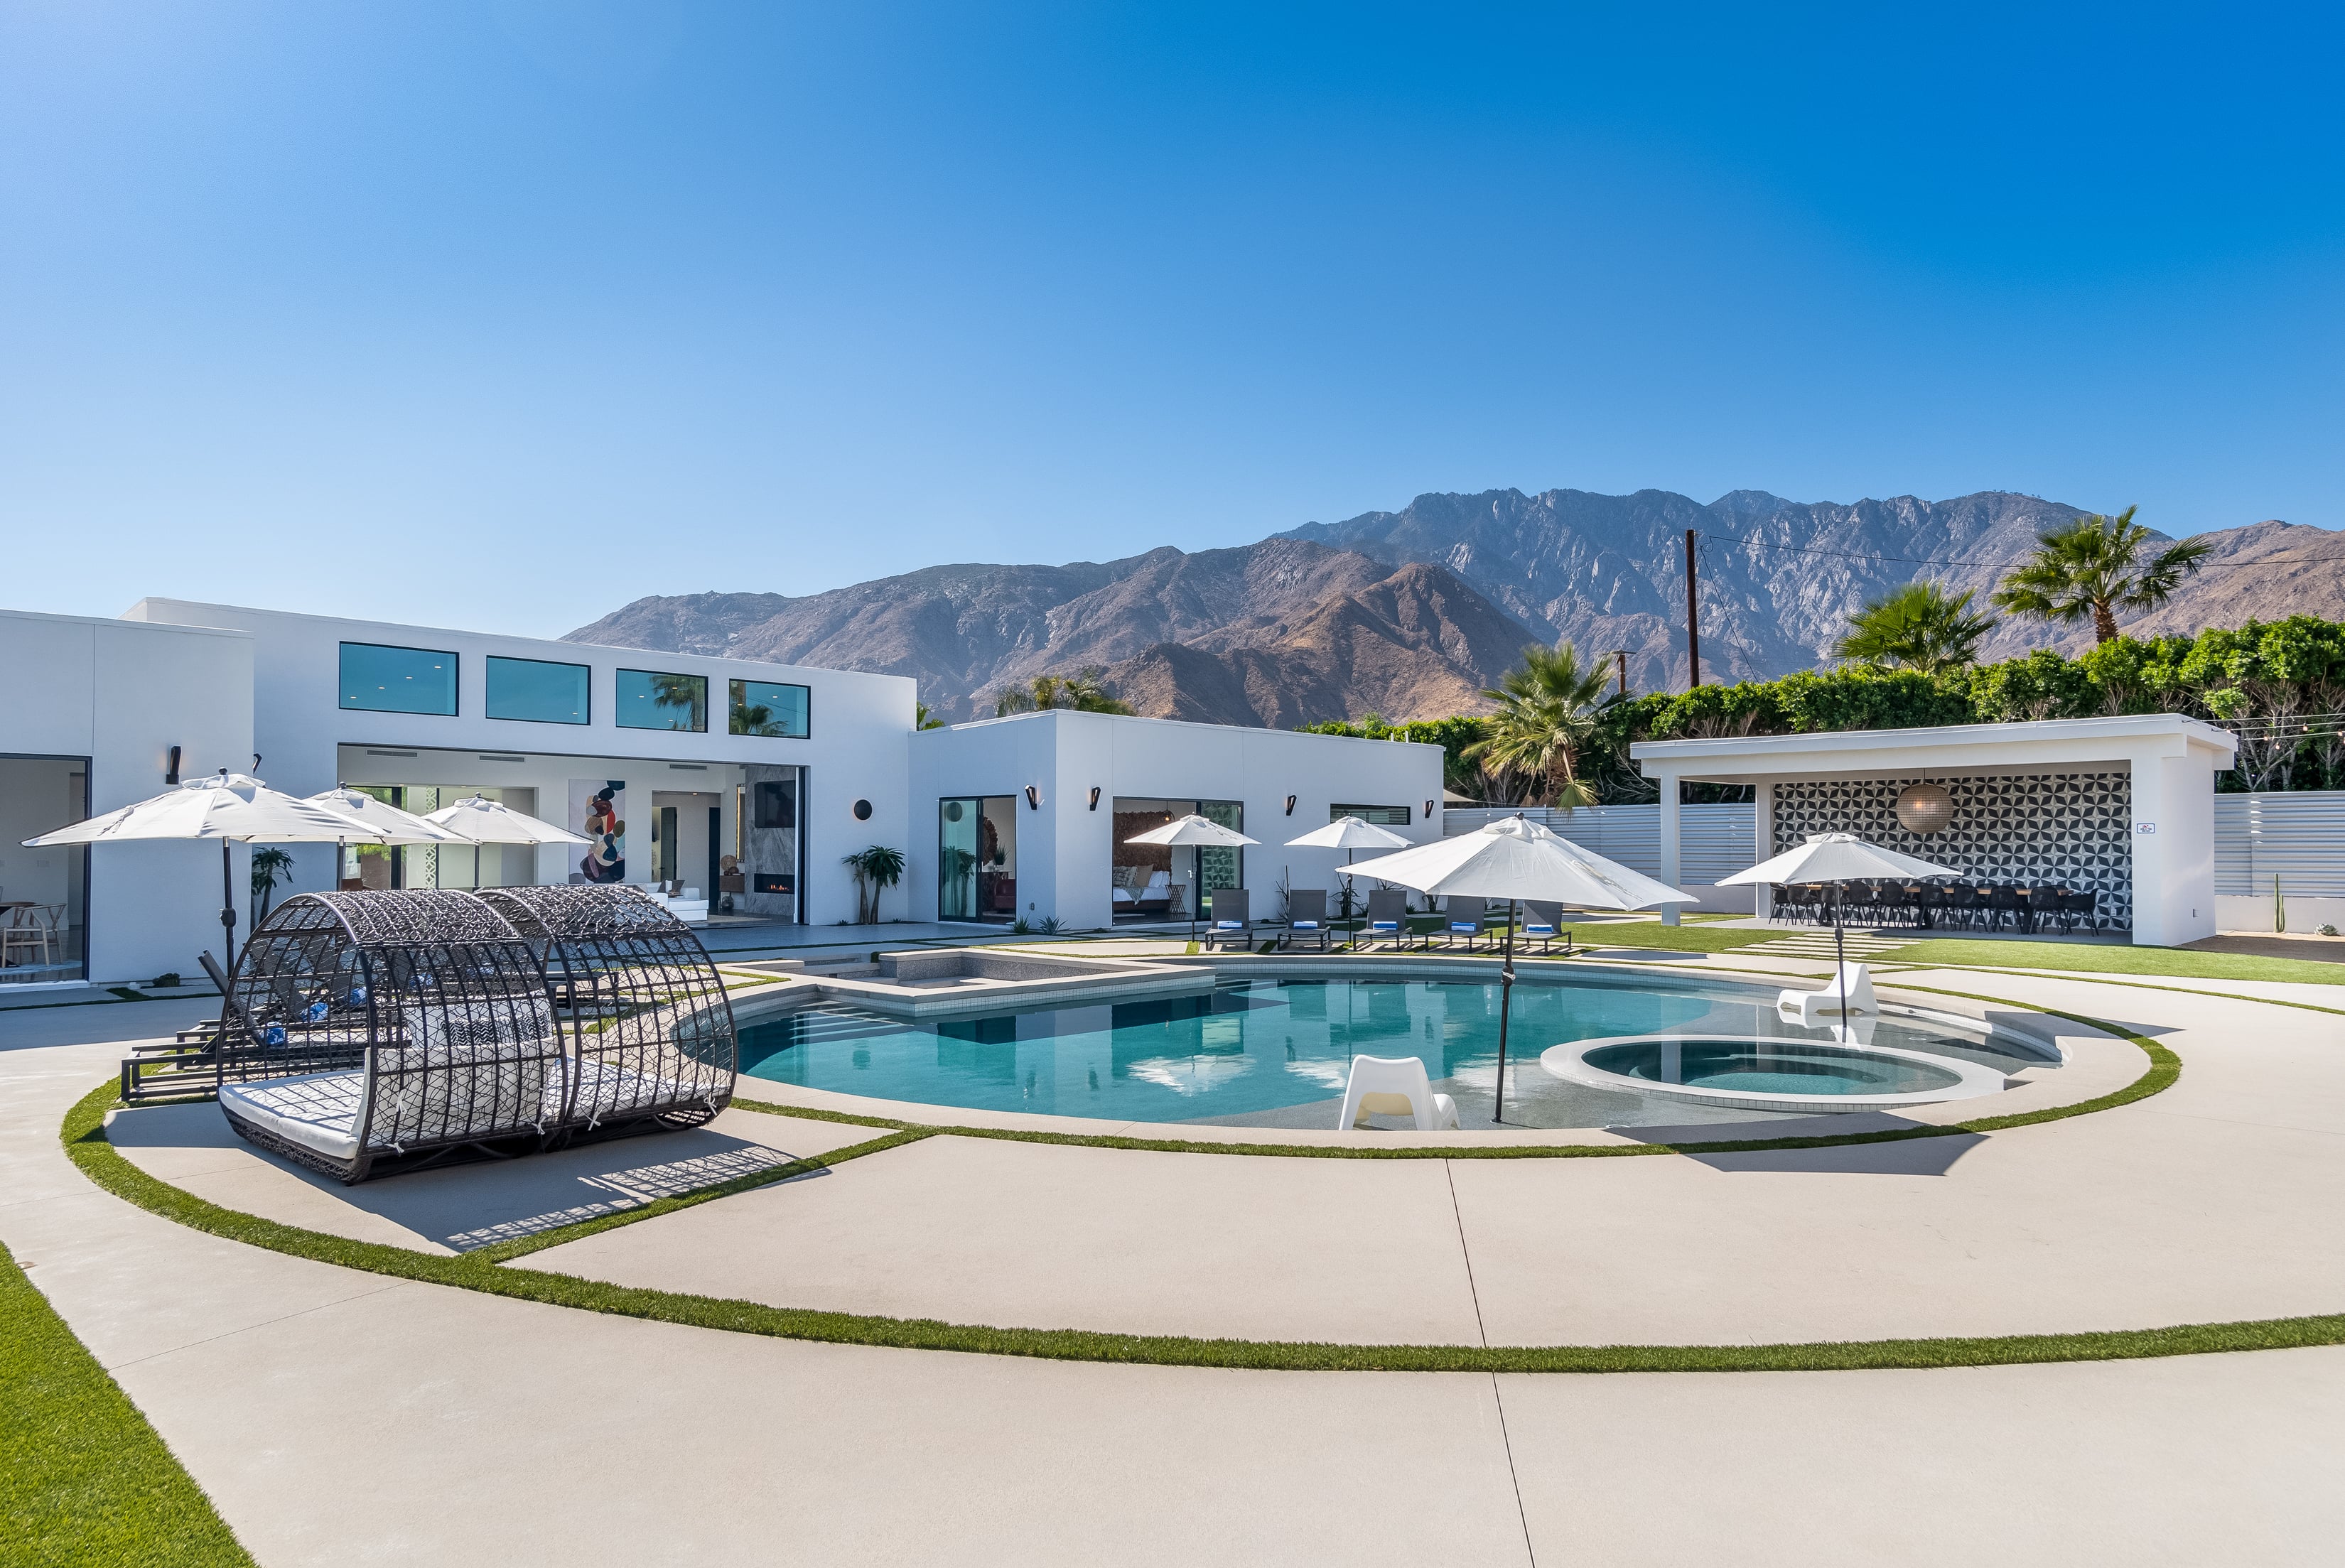 Move to Greater Palm Springs for Idyllic Quality of Life